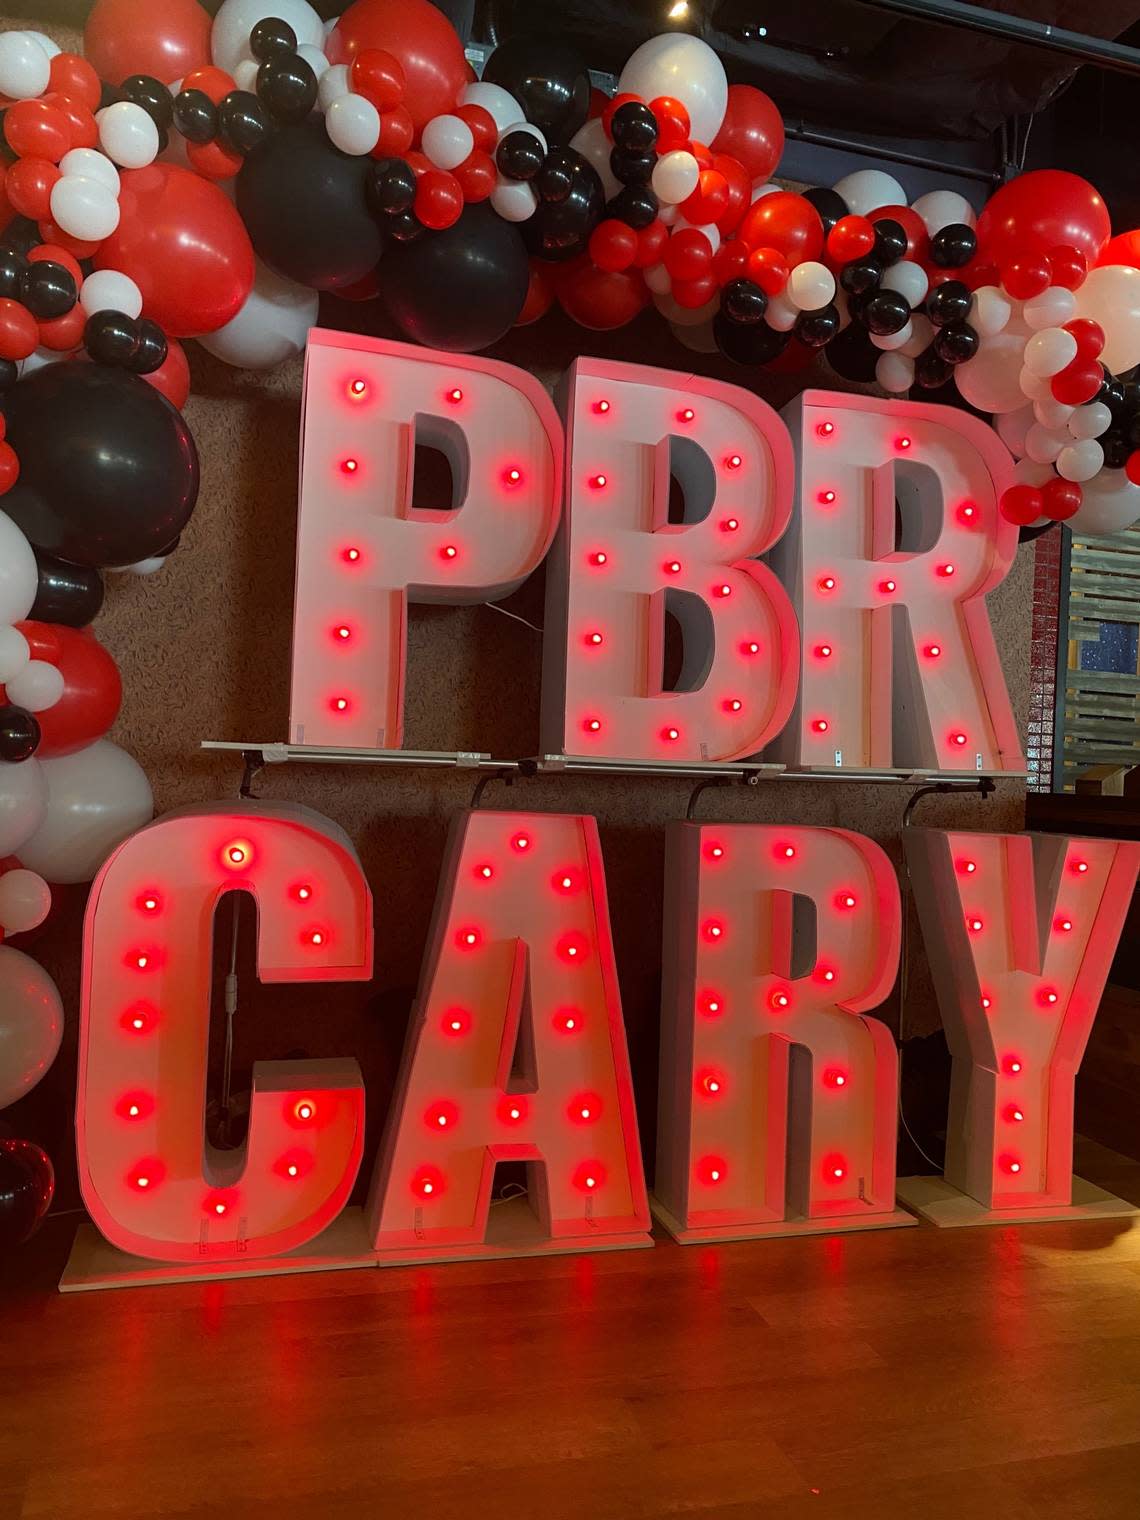 PBR Cowboy Bar is located inside of Sports & Social in the Fenton development in Cary, N.C.